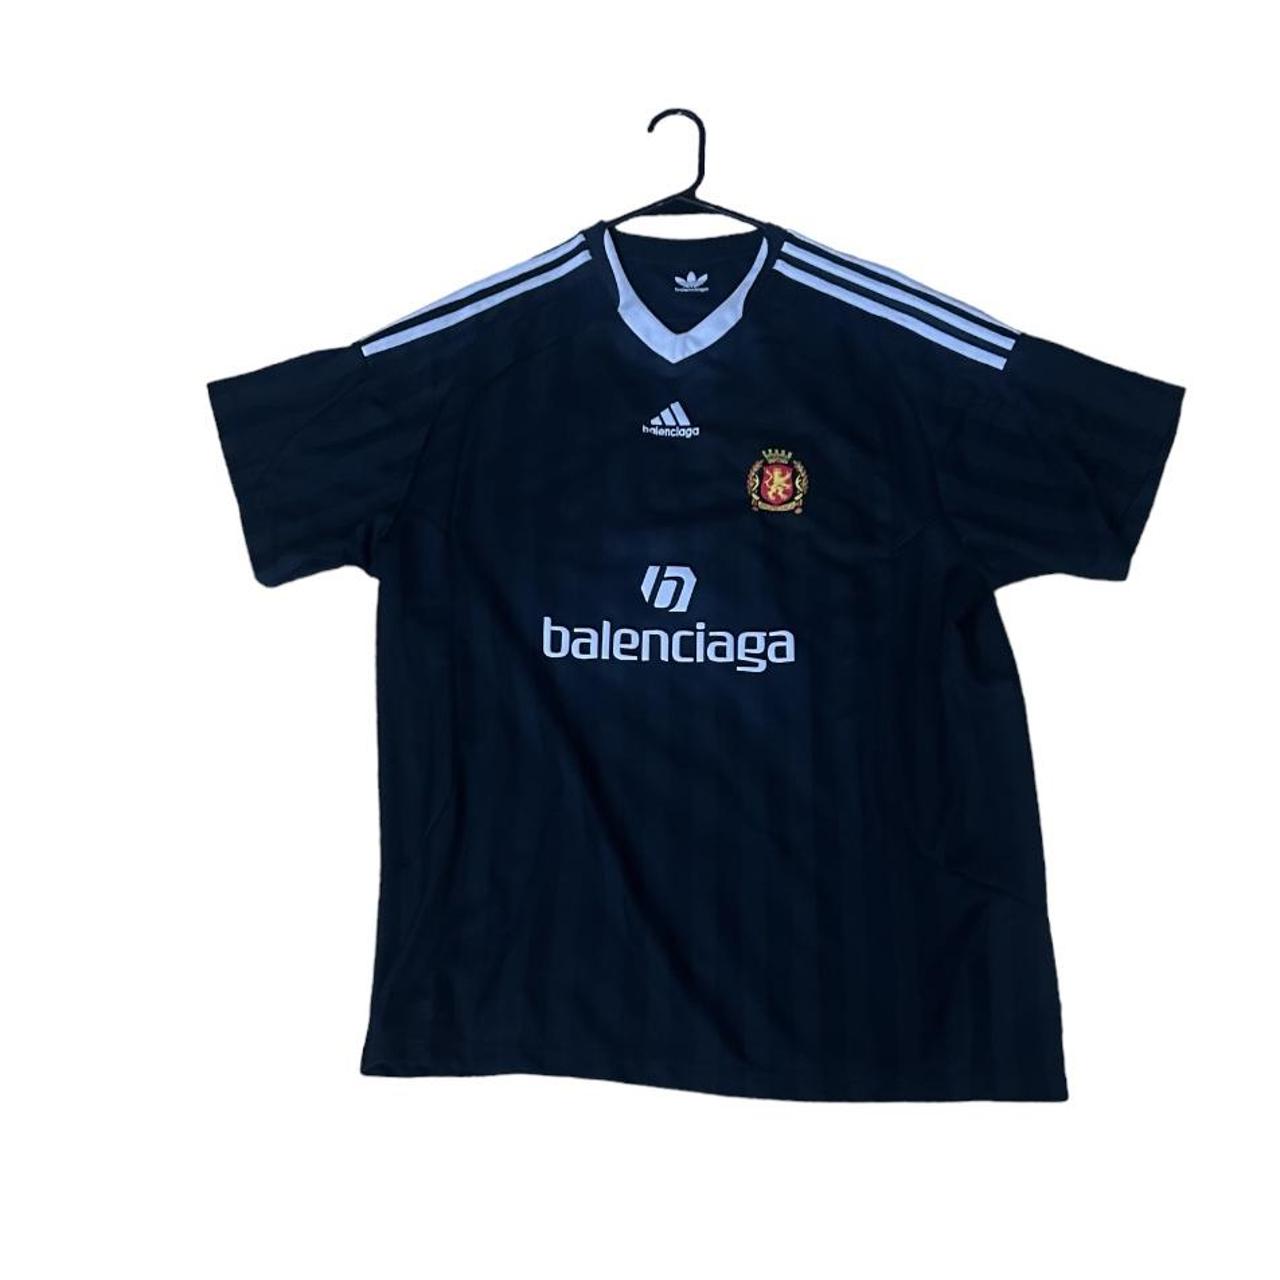 NSSs 2nd Collection Of Fashion Football Jerseys  Hypebeast